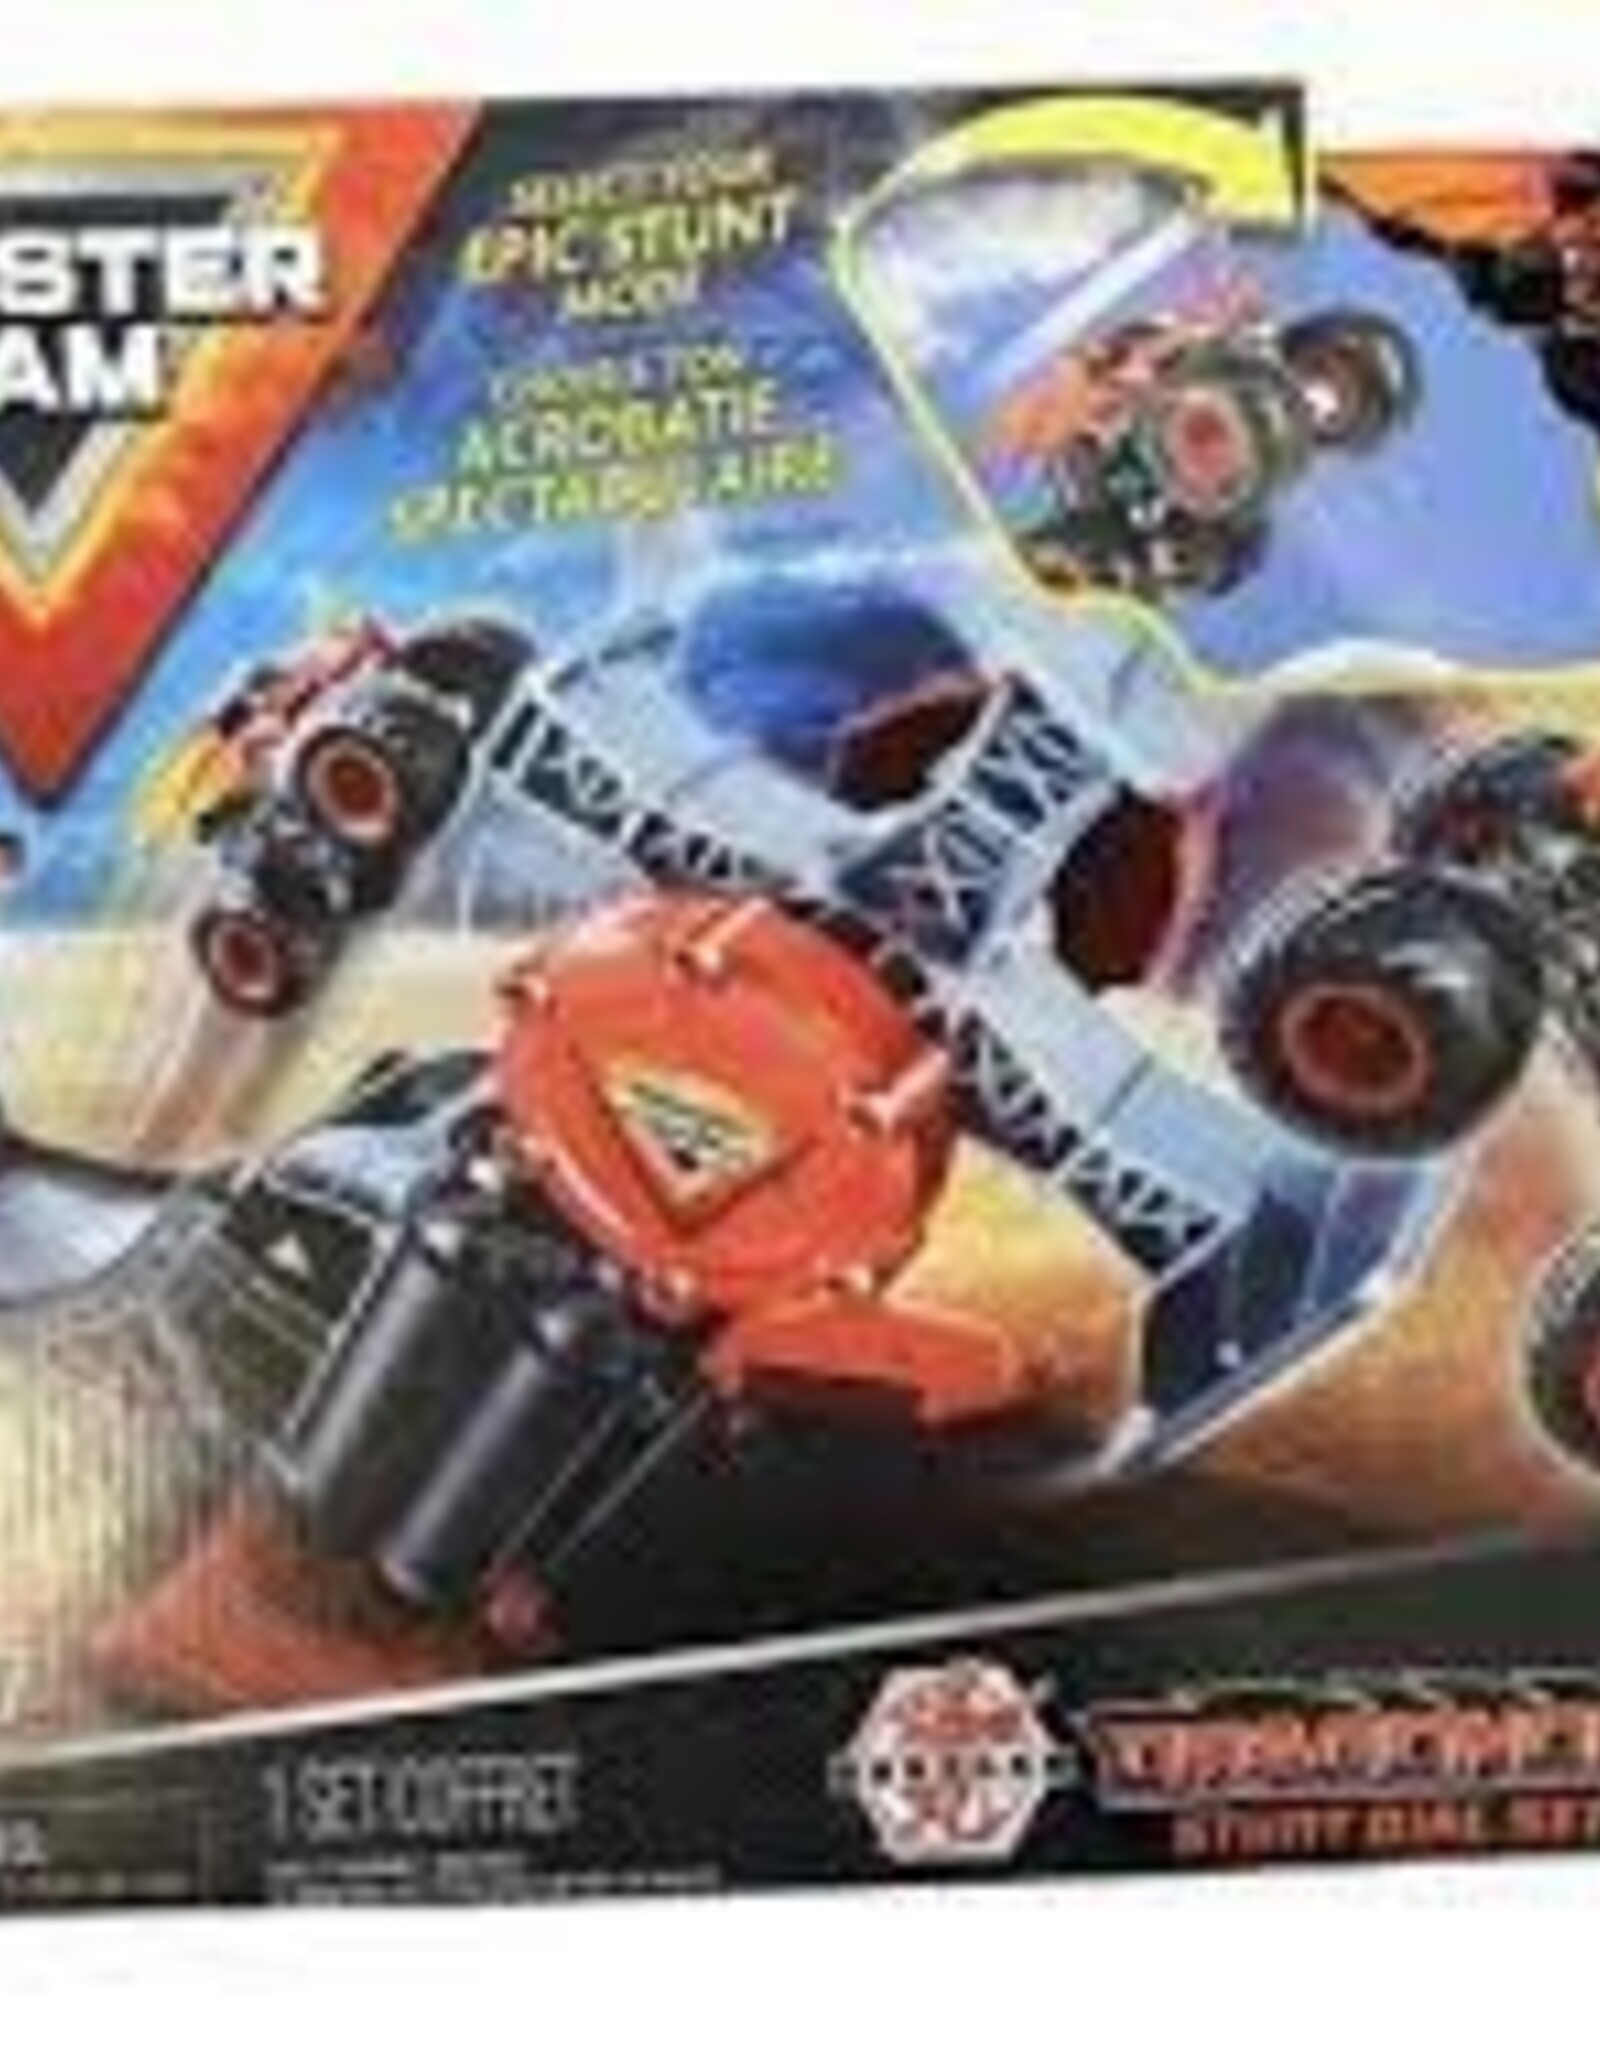 Gund/Spinmaster Monster Jam, Official Zombie Madness Playset Featuring Exclusive 1:64 Scale Die-Cast Zombie Monster Truck